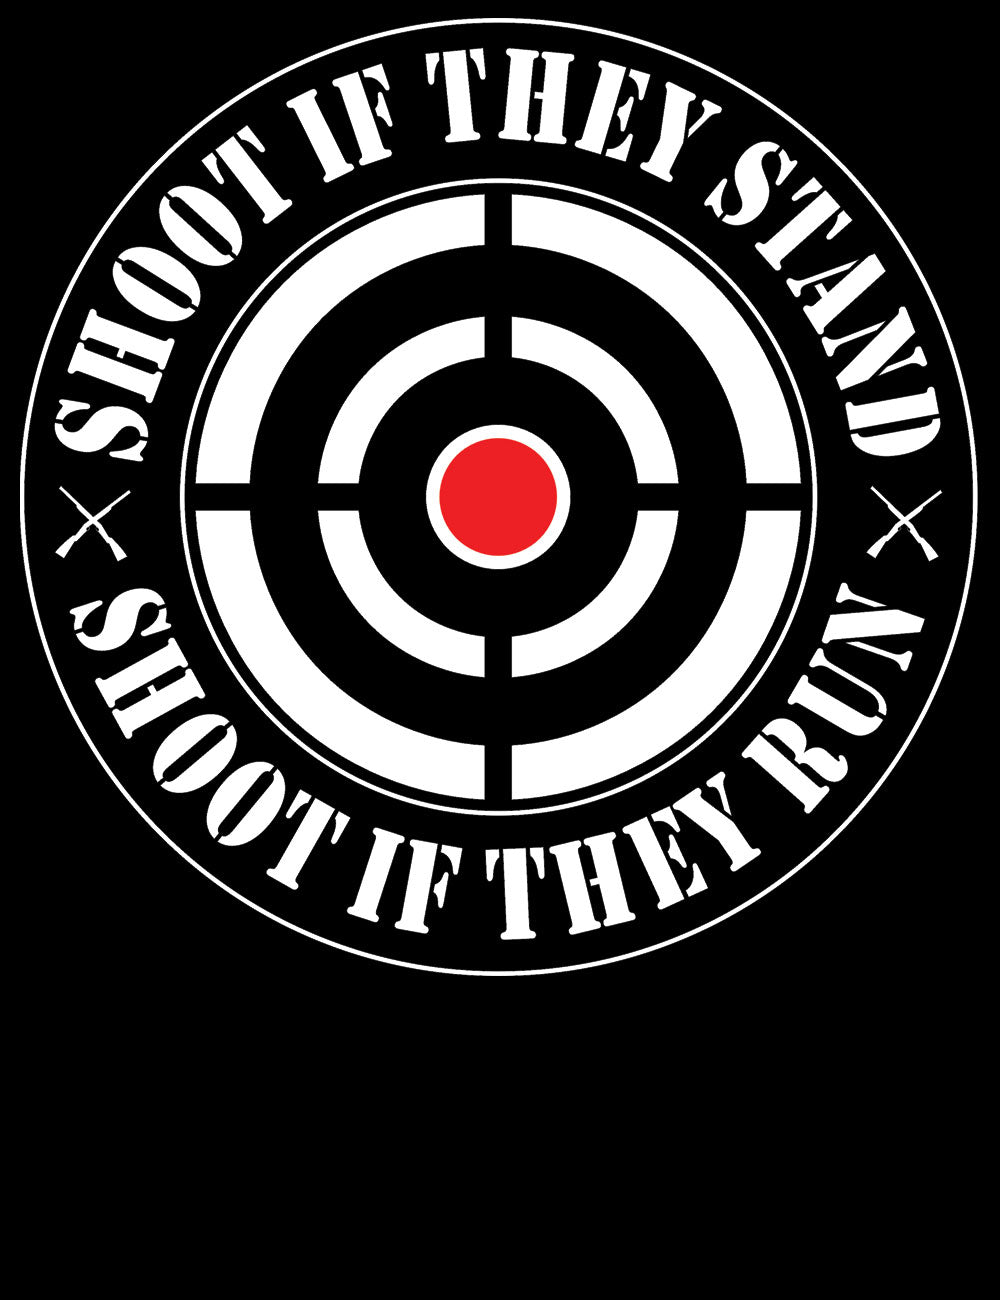 Shoot If They Stand T-Shirt